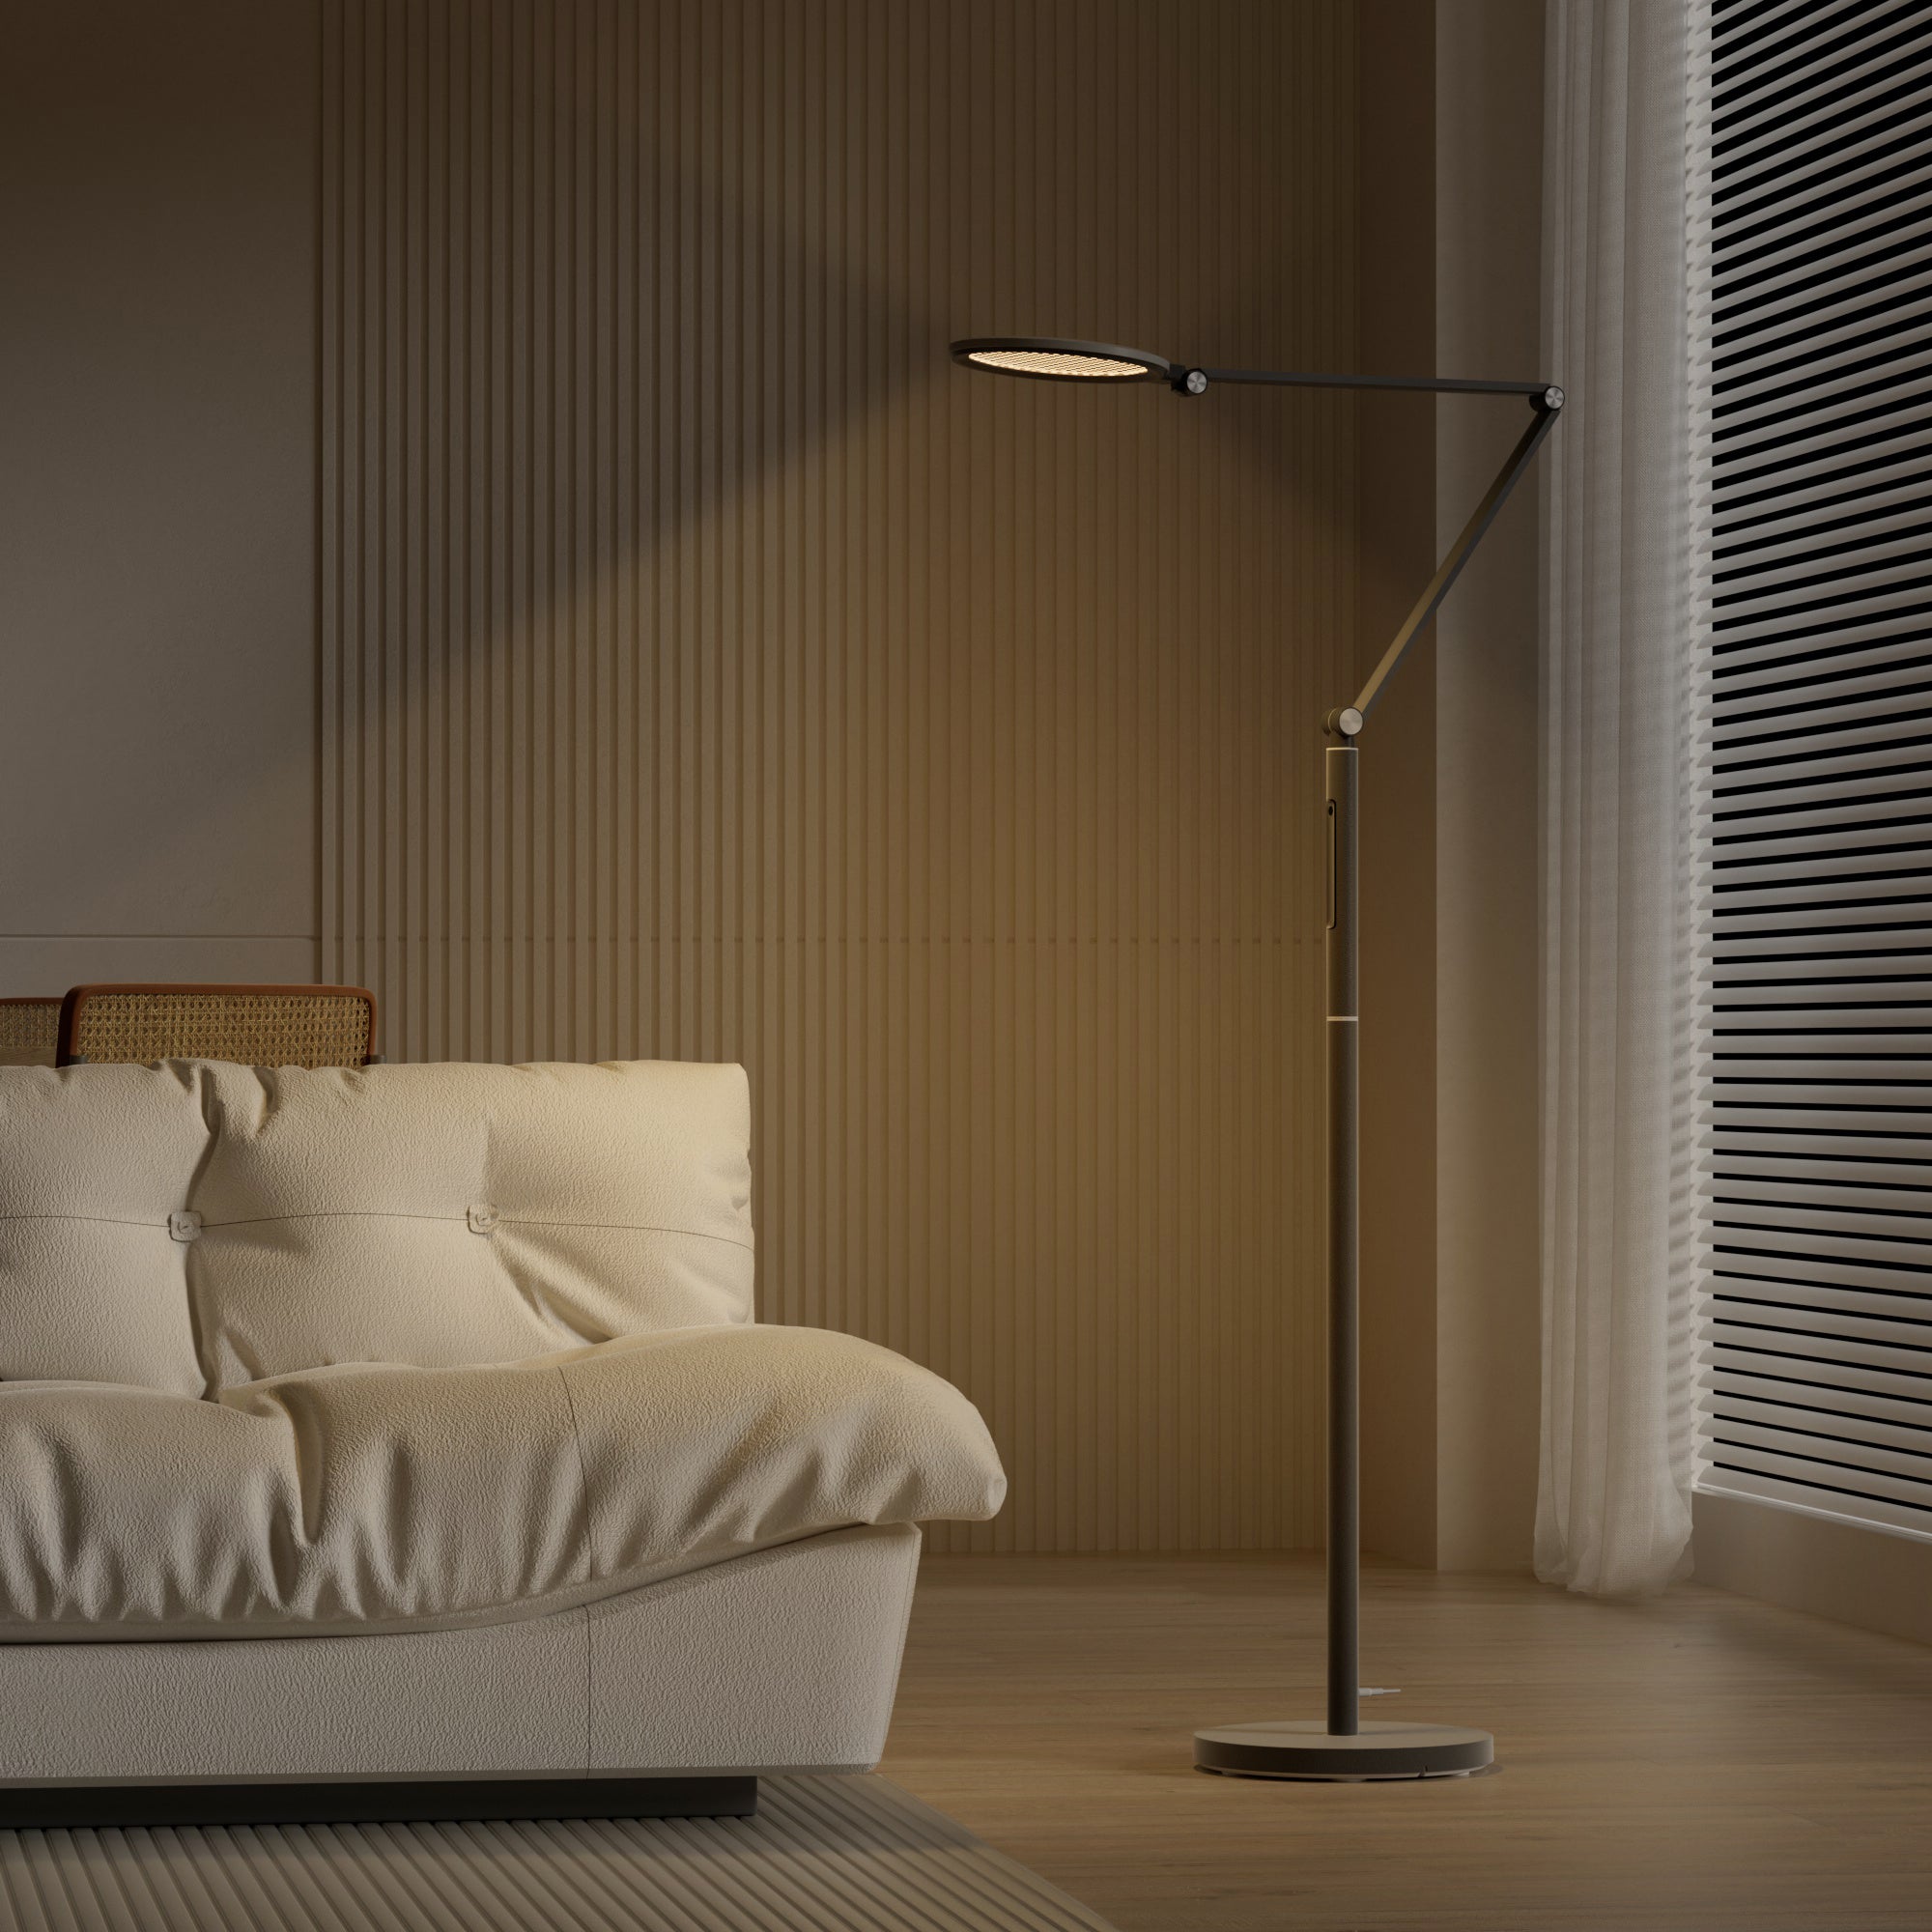 Honeywell Eye Protection Floor Lamp with Remote - Sunturalux™ F01 Adjustable 4 Axis for Living Room